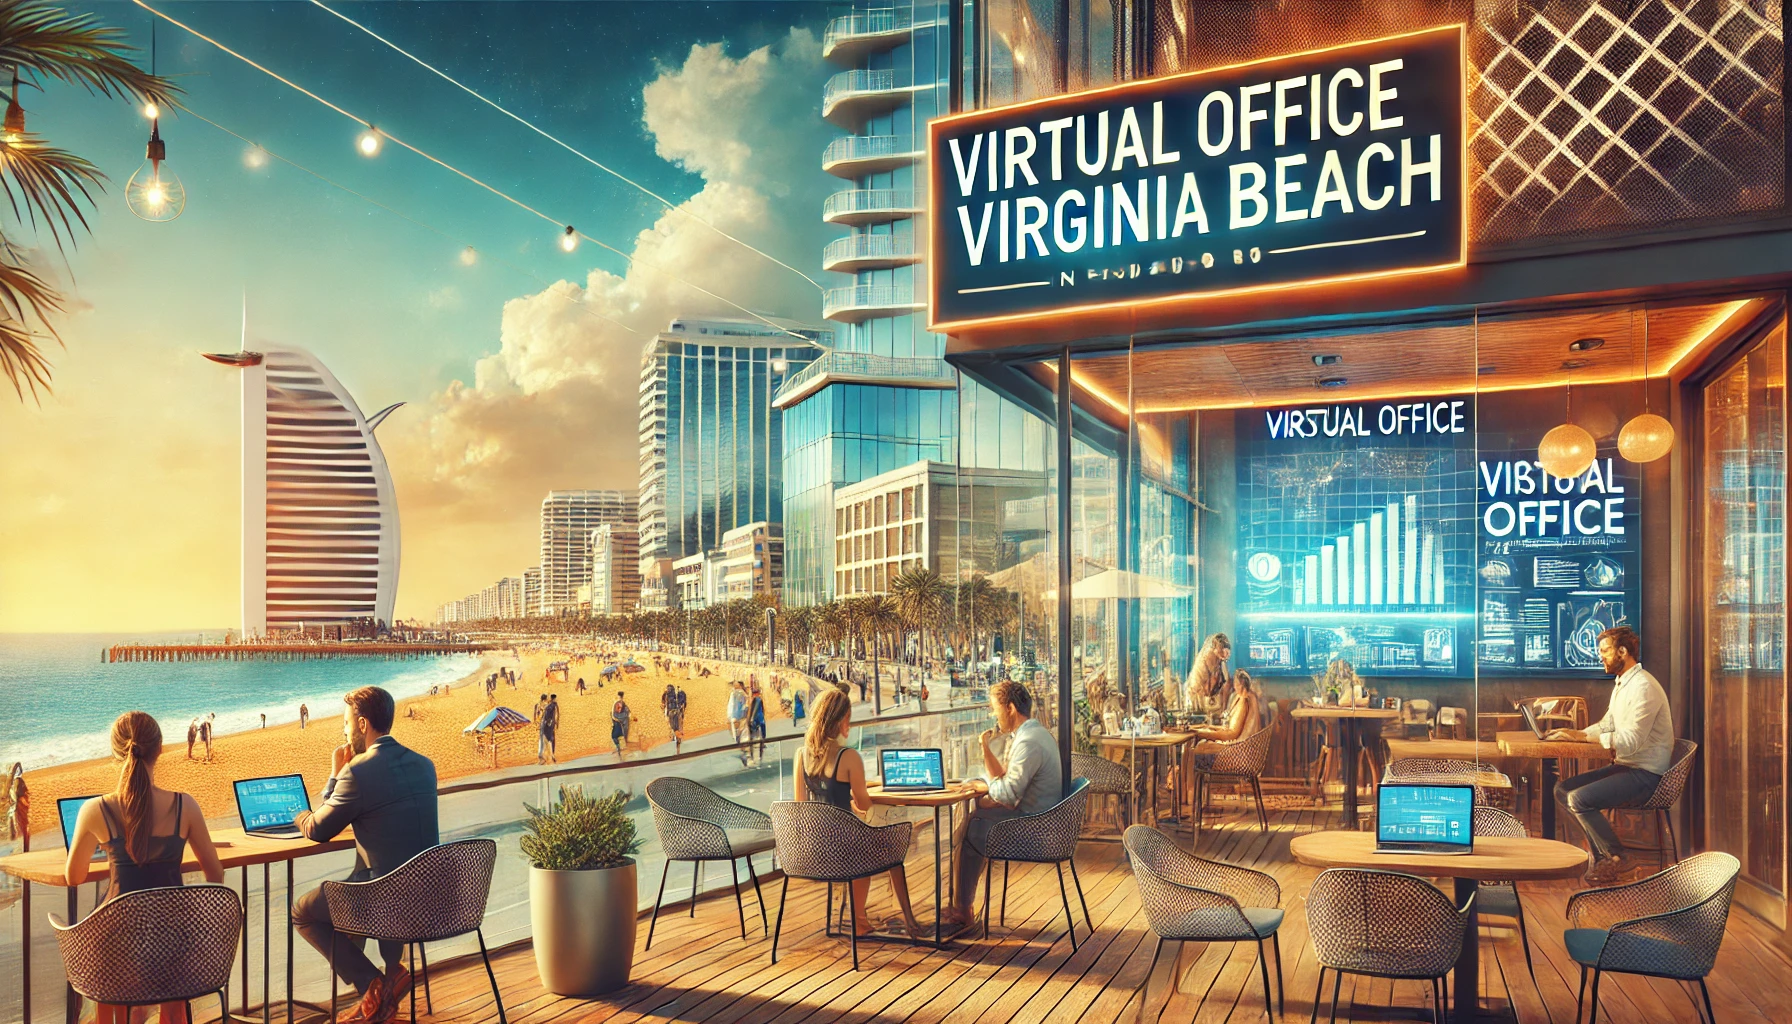 Scenic view of Virginia Beach boardwalk with virtual office setup.